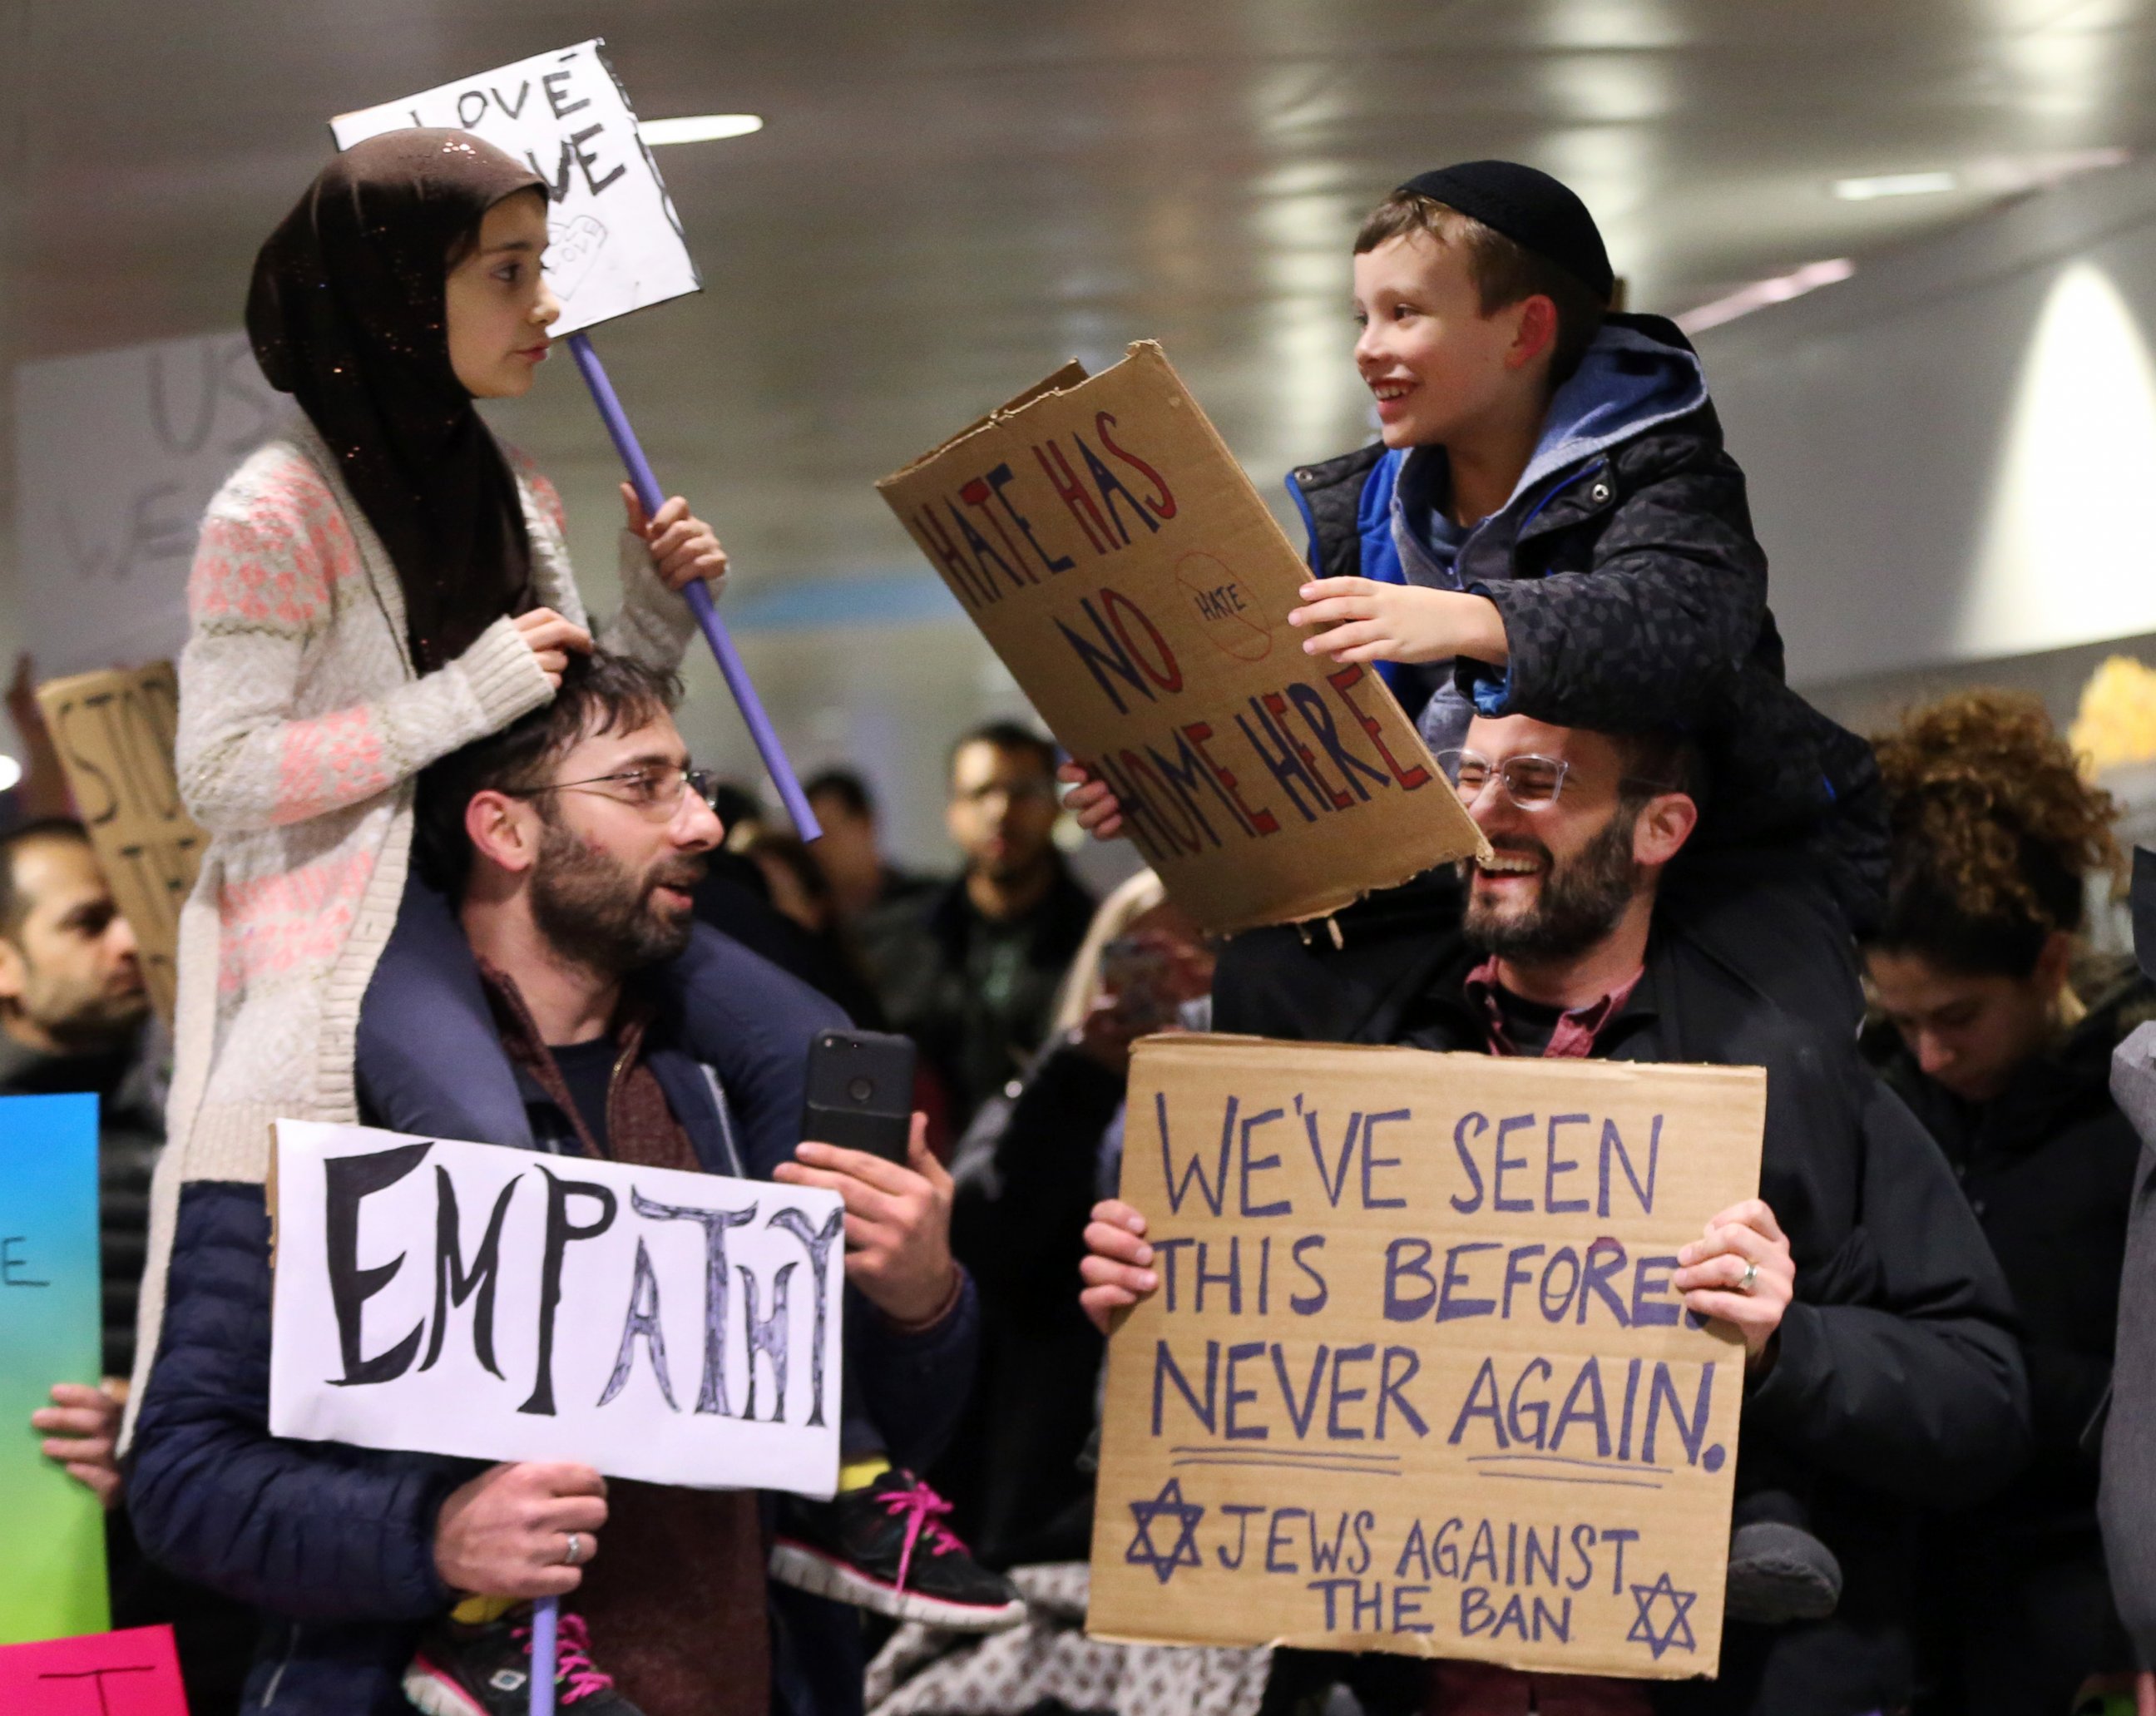 PHOTO: Meryem Yildirim, 7, left, sits on her father, Satih, of Schaumburg, and Adin Bendat-Appell, 9, right, sits on his father, Rabbi Jordan Bendat-Appell, of Deerfield, during a protest, on Jan. 30, 2017 at O'Hare International Airport in Chicago.